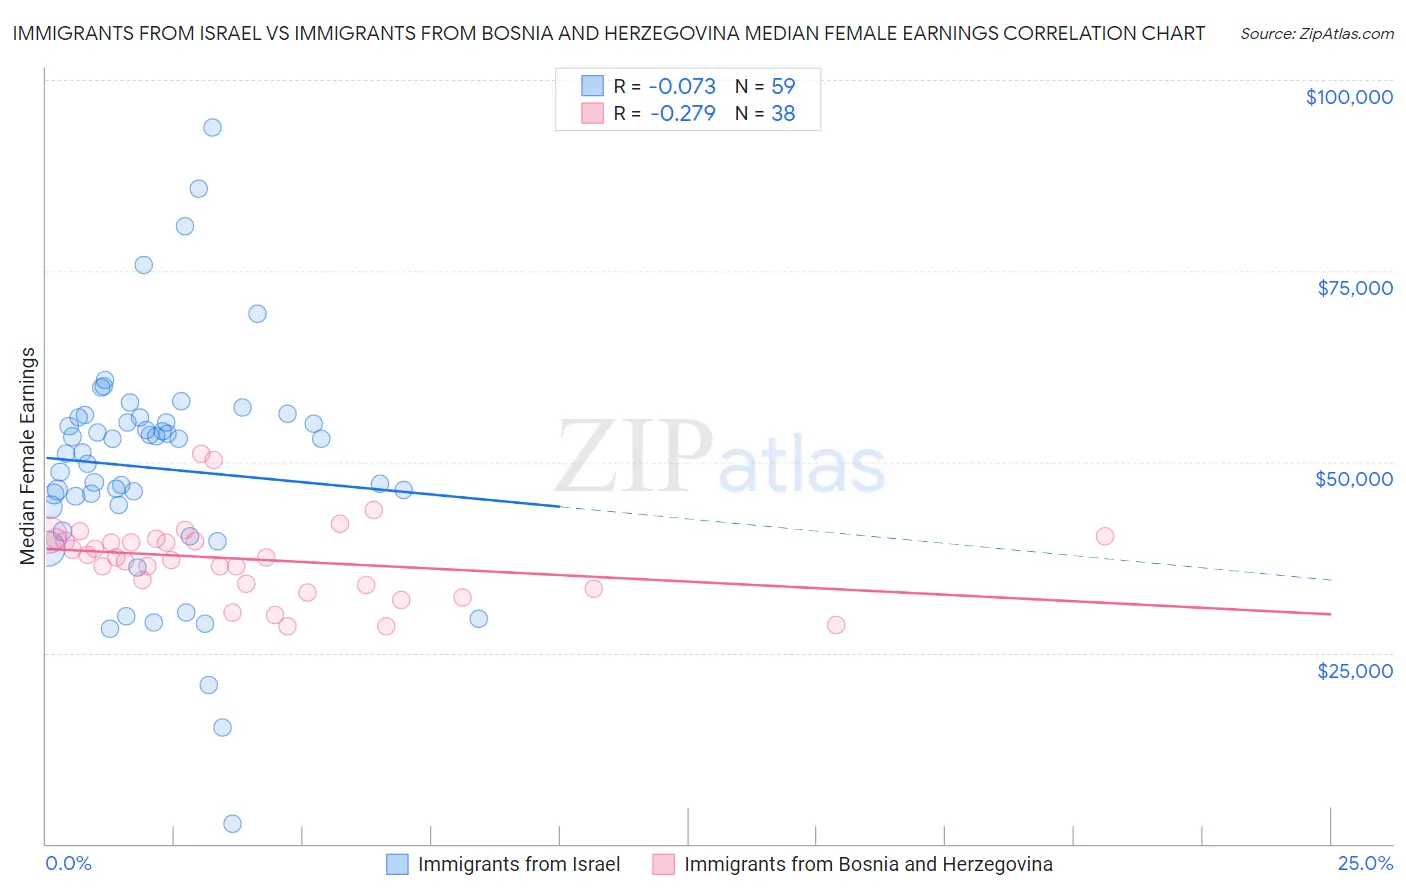 Immigrants from Israel vs Immigrants from Bosnia and Herzegovina Median Female Earnings